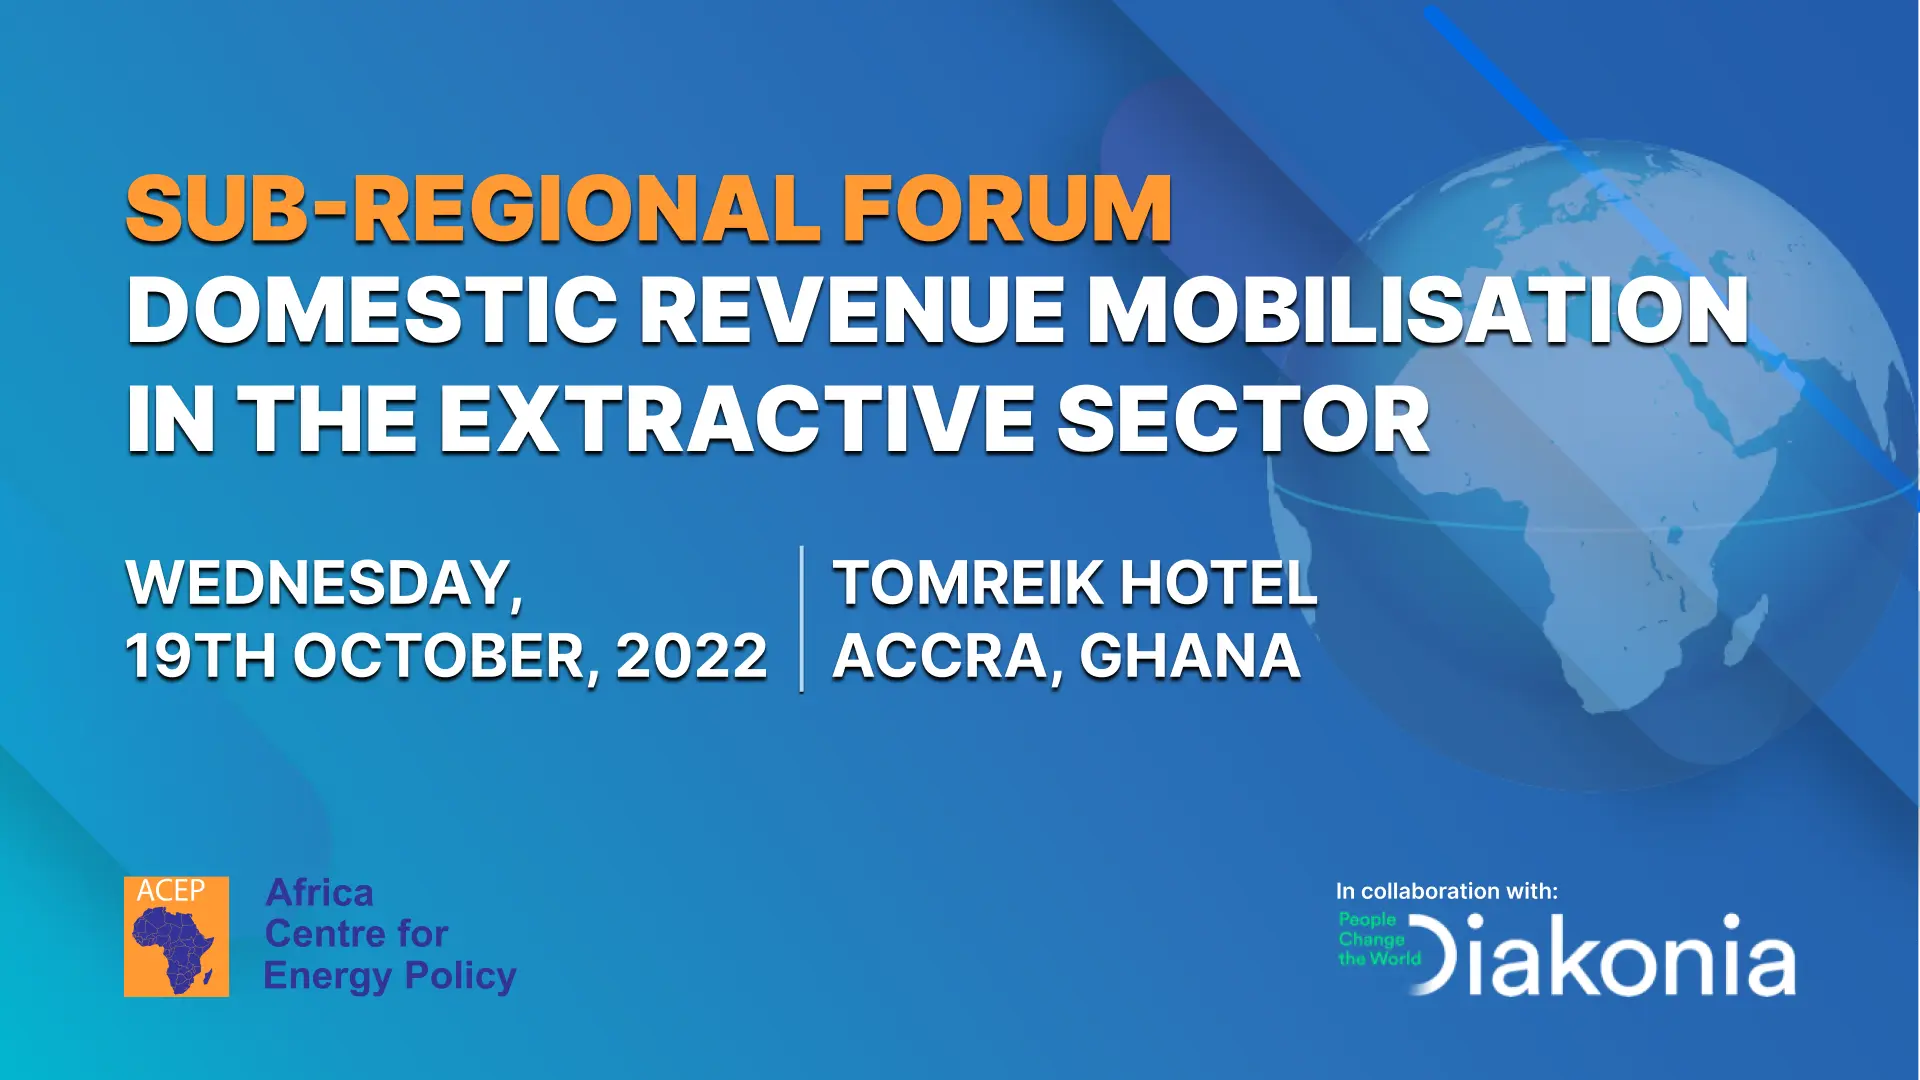 Sub-Regional Forum on Domestic Revenue Mobilisation in the Extractive Sector